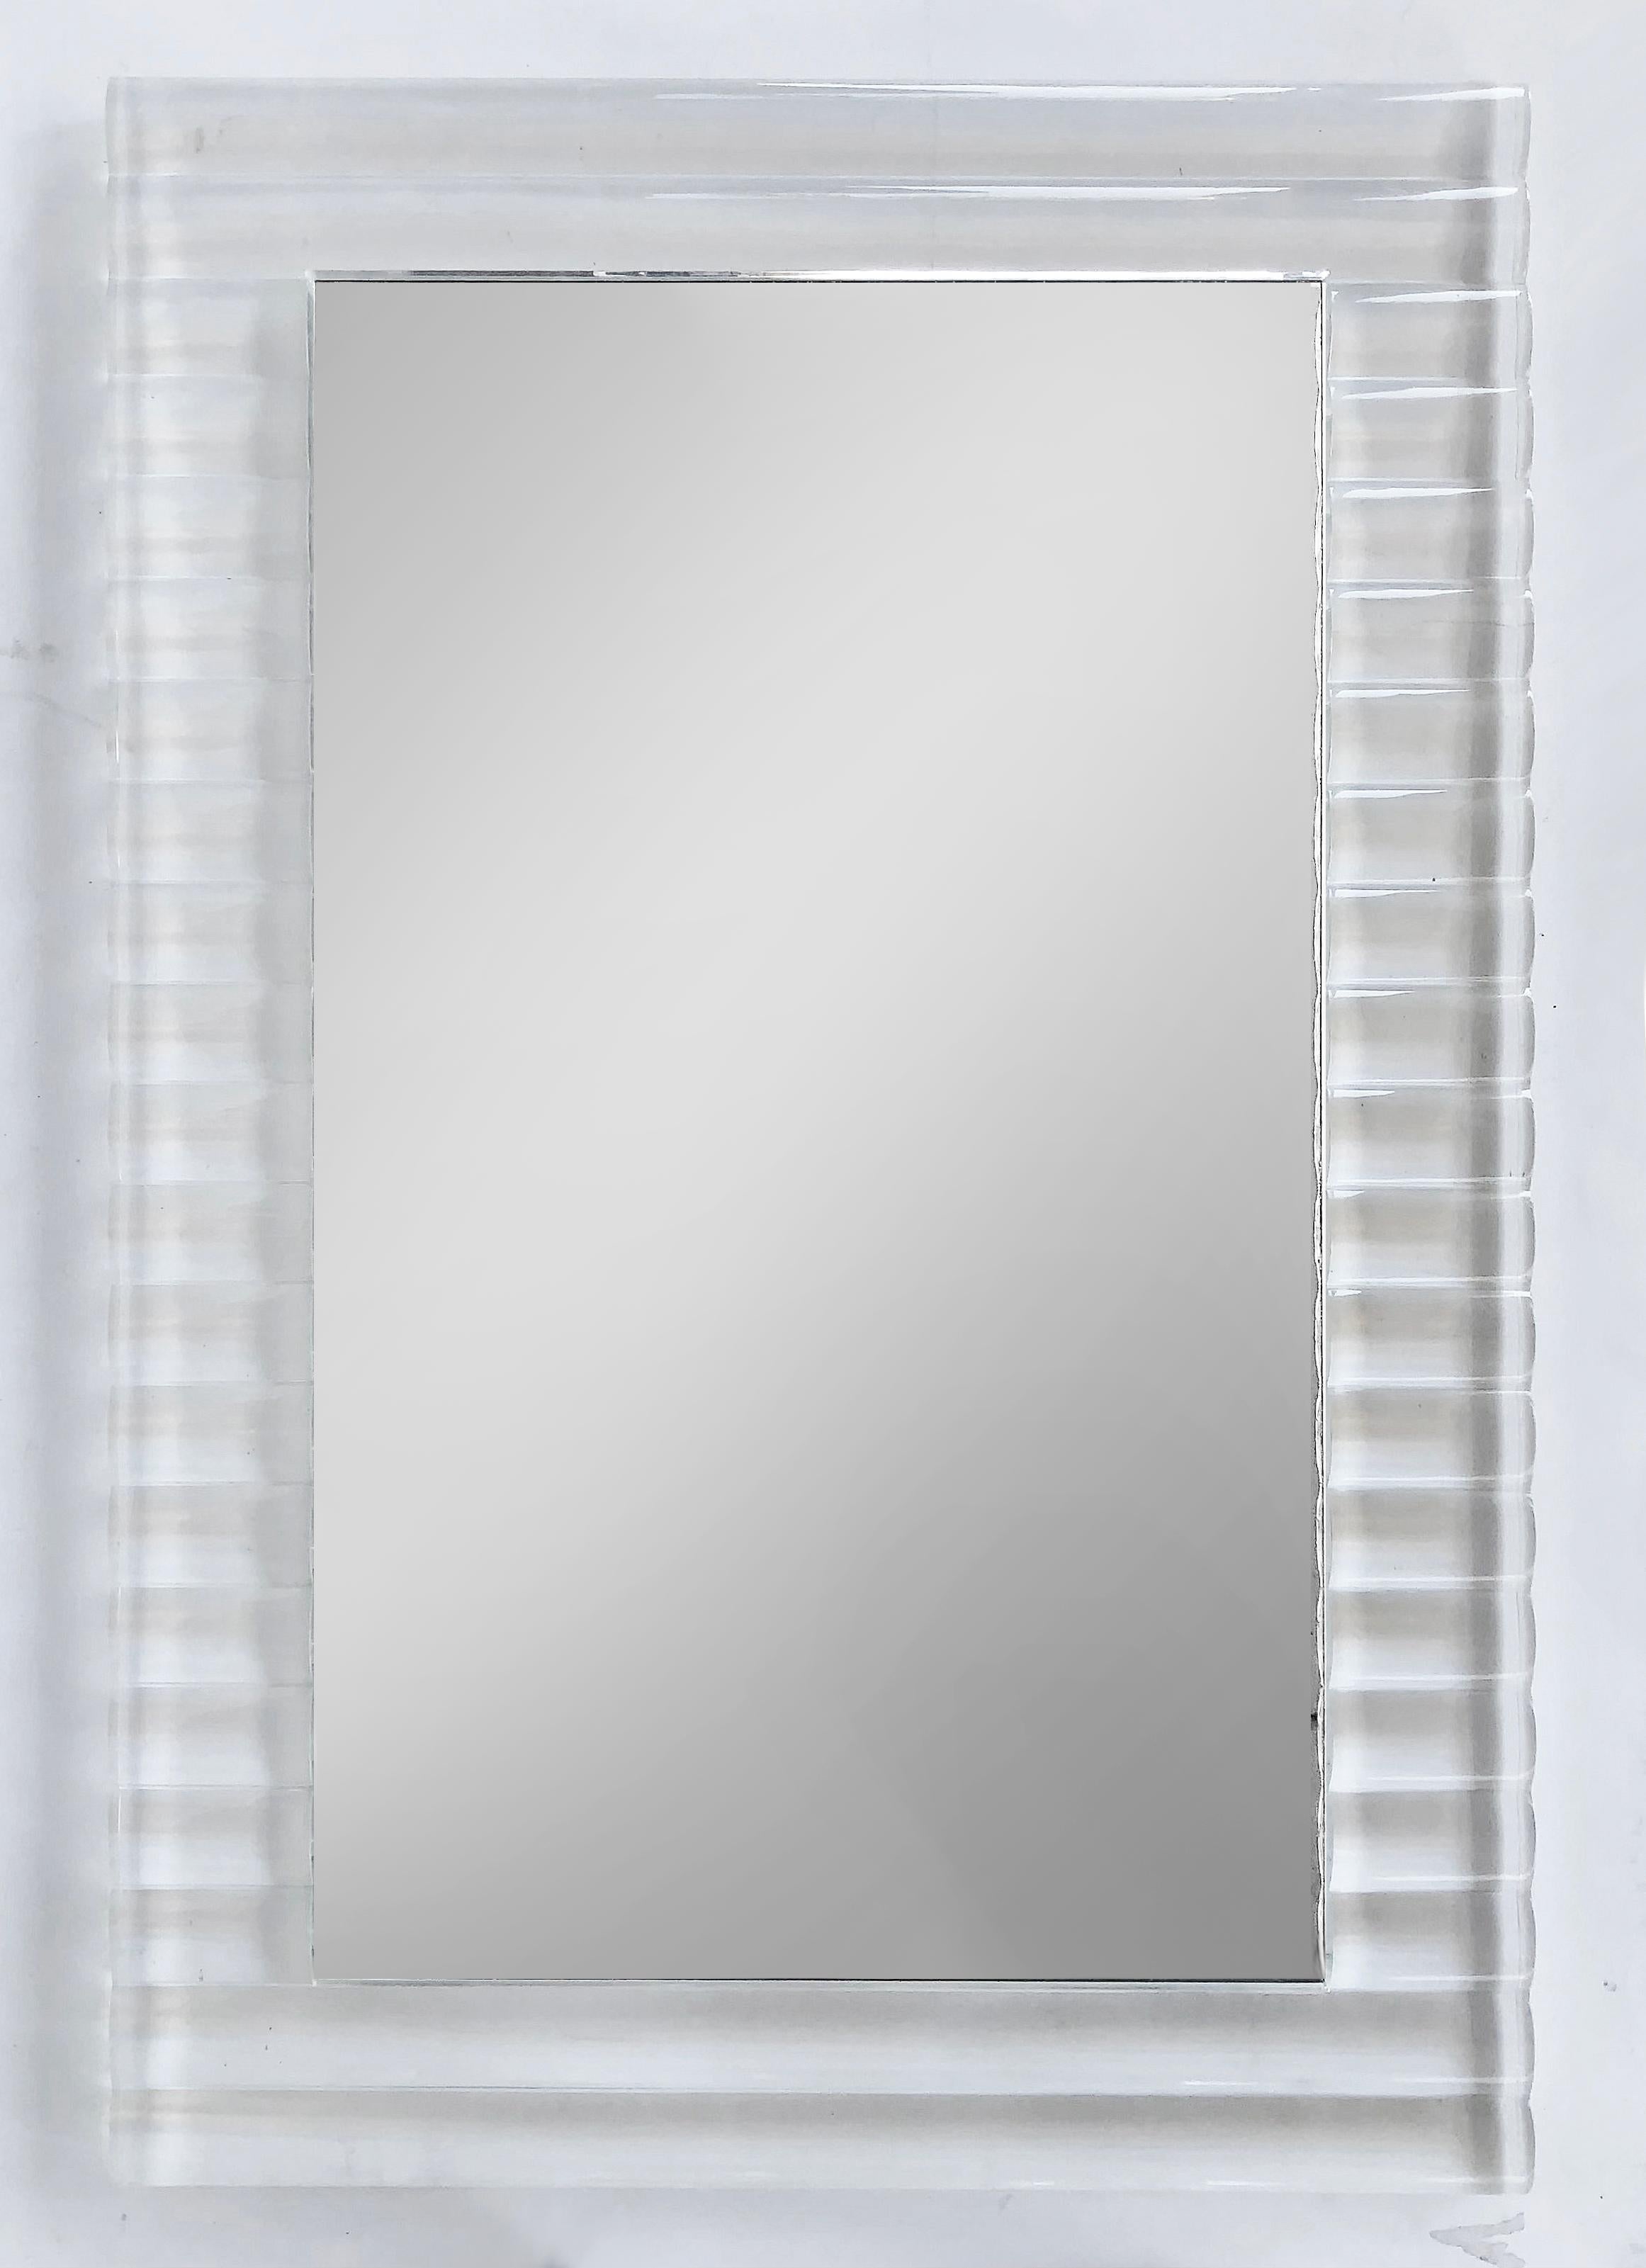 Substantial Vintage Lucite Framed Ribbed Wall Mirror, Signed

Offered for sale is a heavy-gauge ribbed pattern lucite wall mirror That is circa 1980. This heavy mirror is illegibly signed within the top right-hand border. The mirror hangs on the